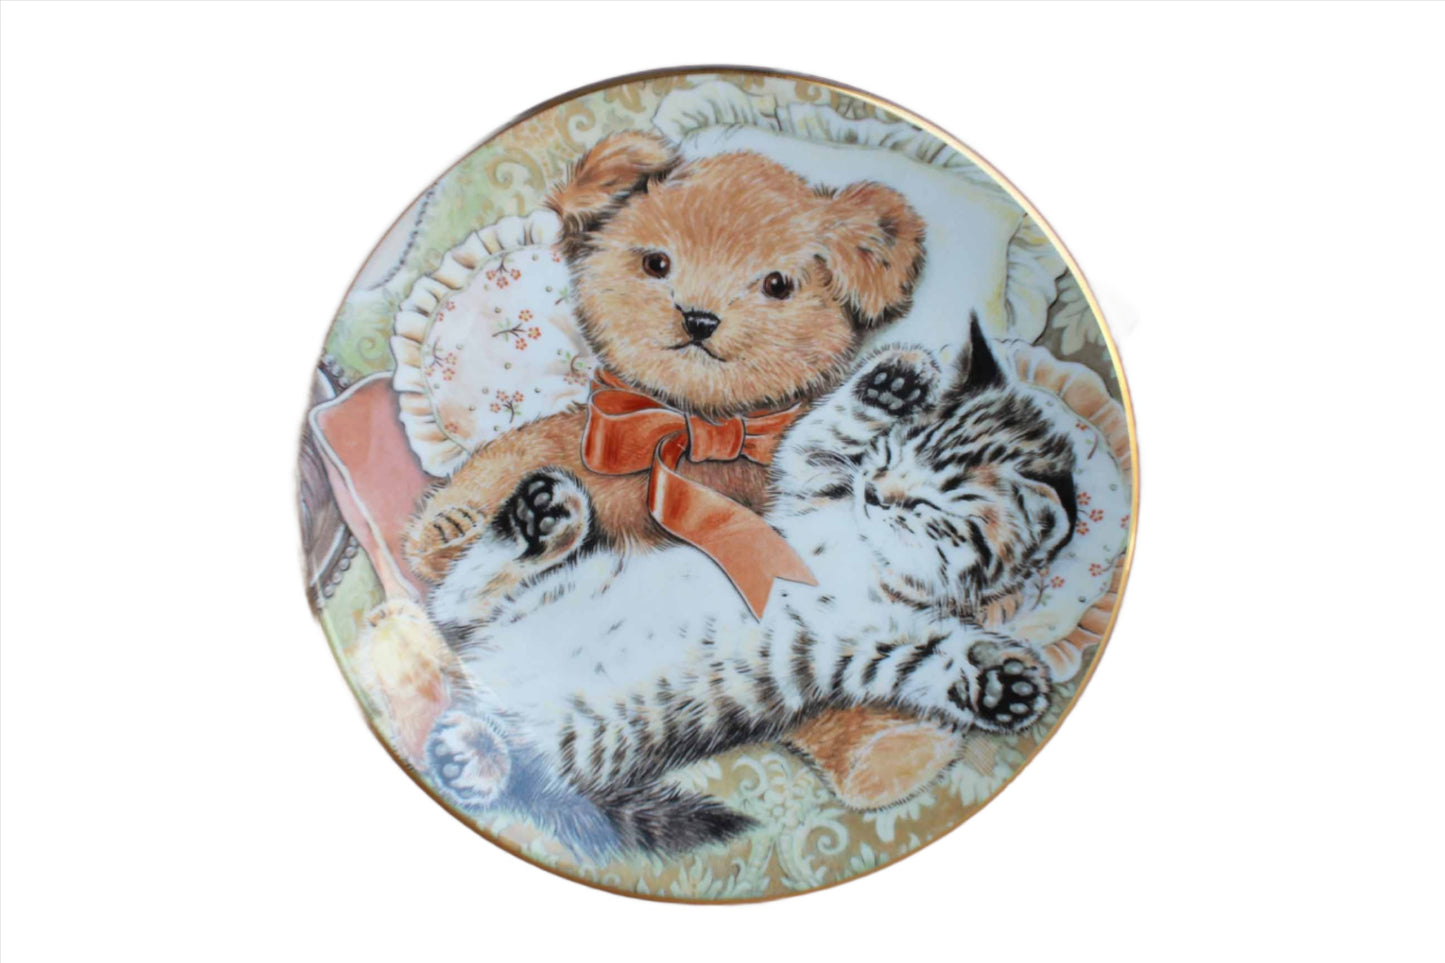 Royal Worcester Crown Ware (England) Bedtime Buddies by Pam Cooper Decorative Plate